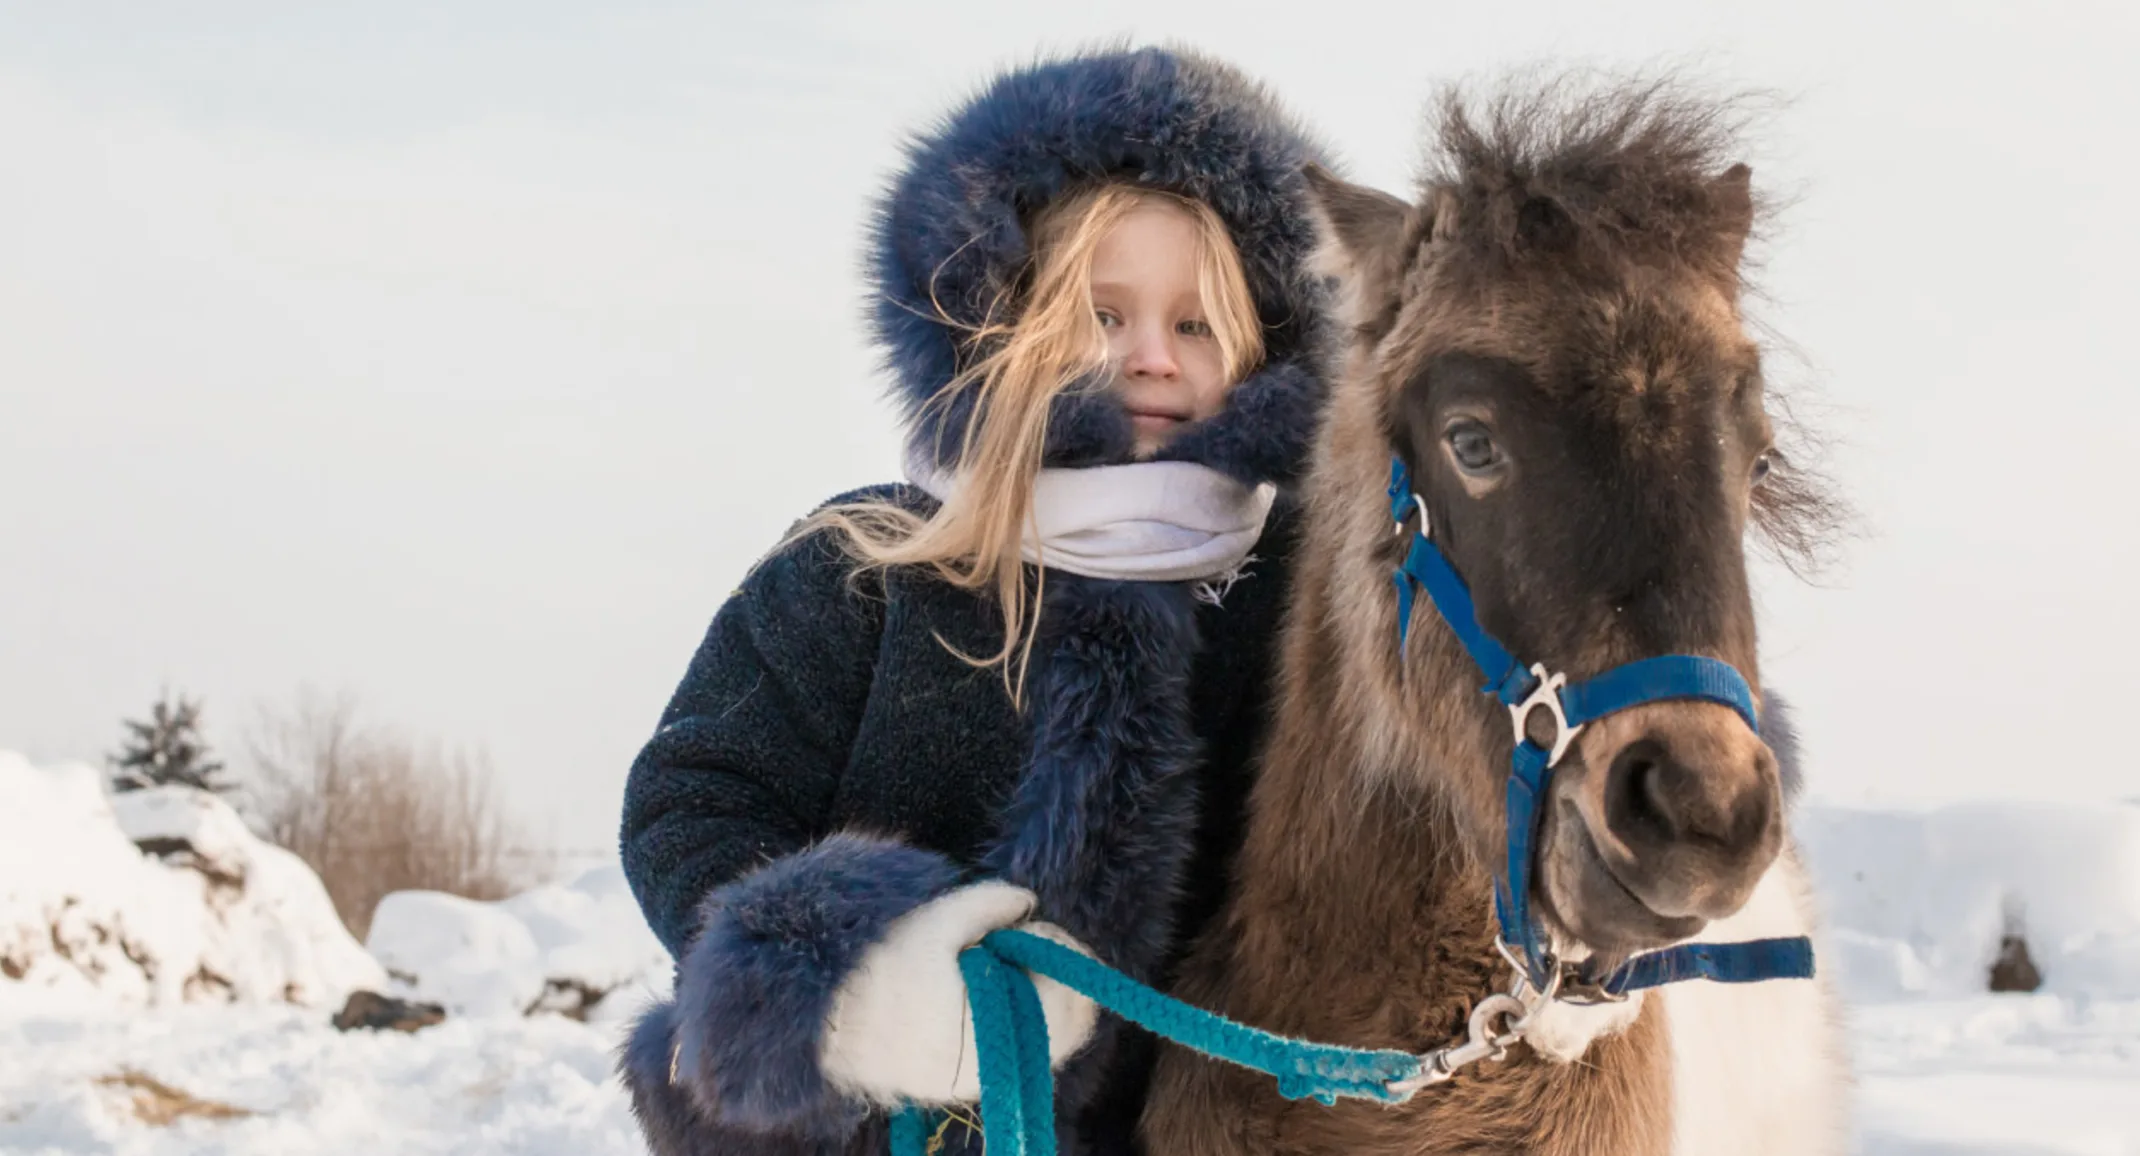 Little Girl with Pony in Snow Winter